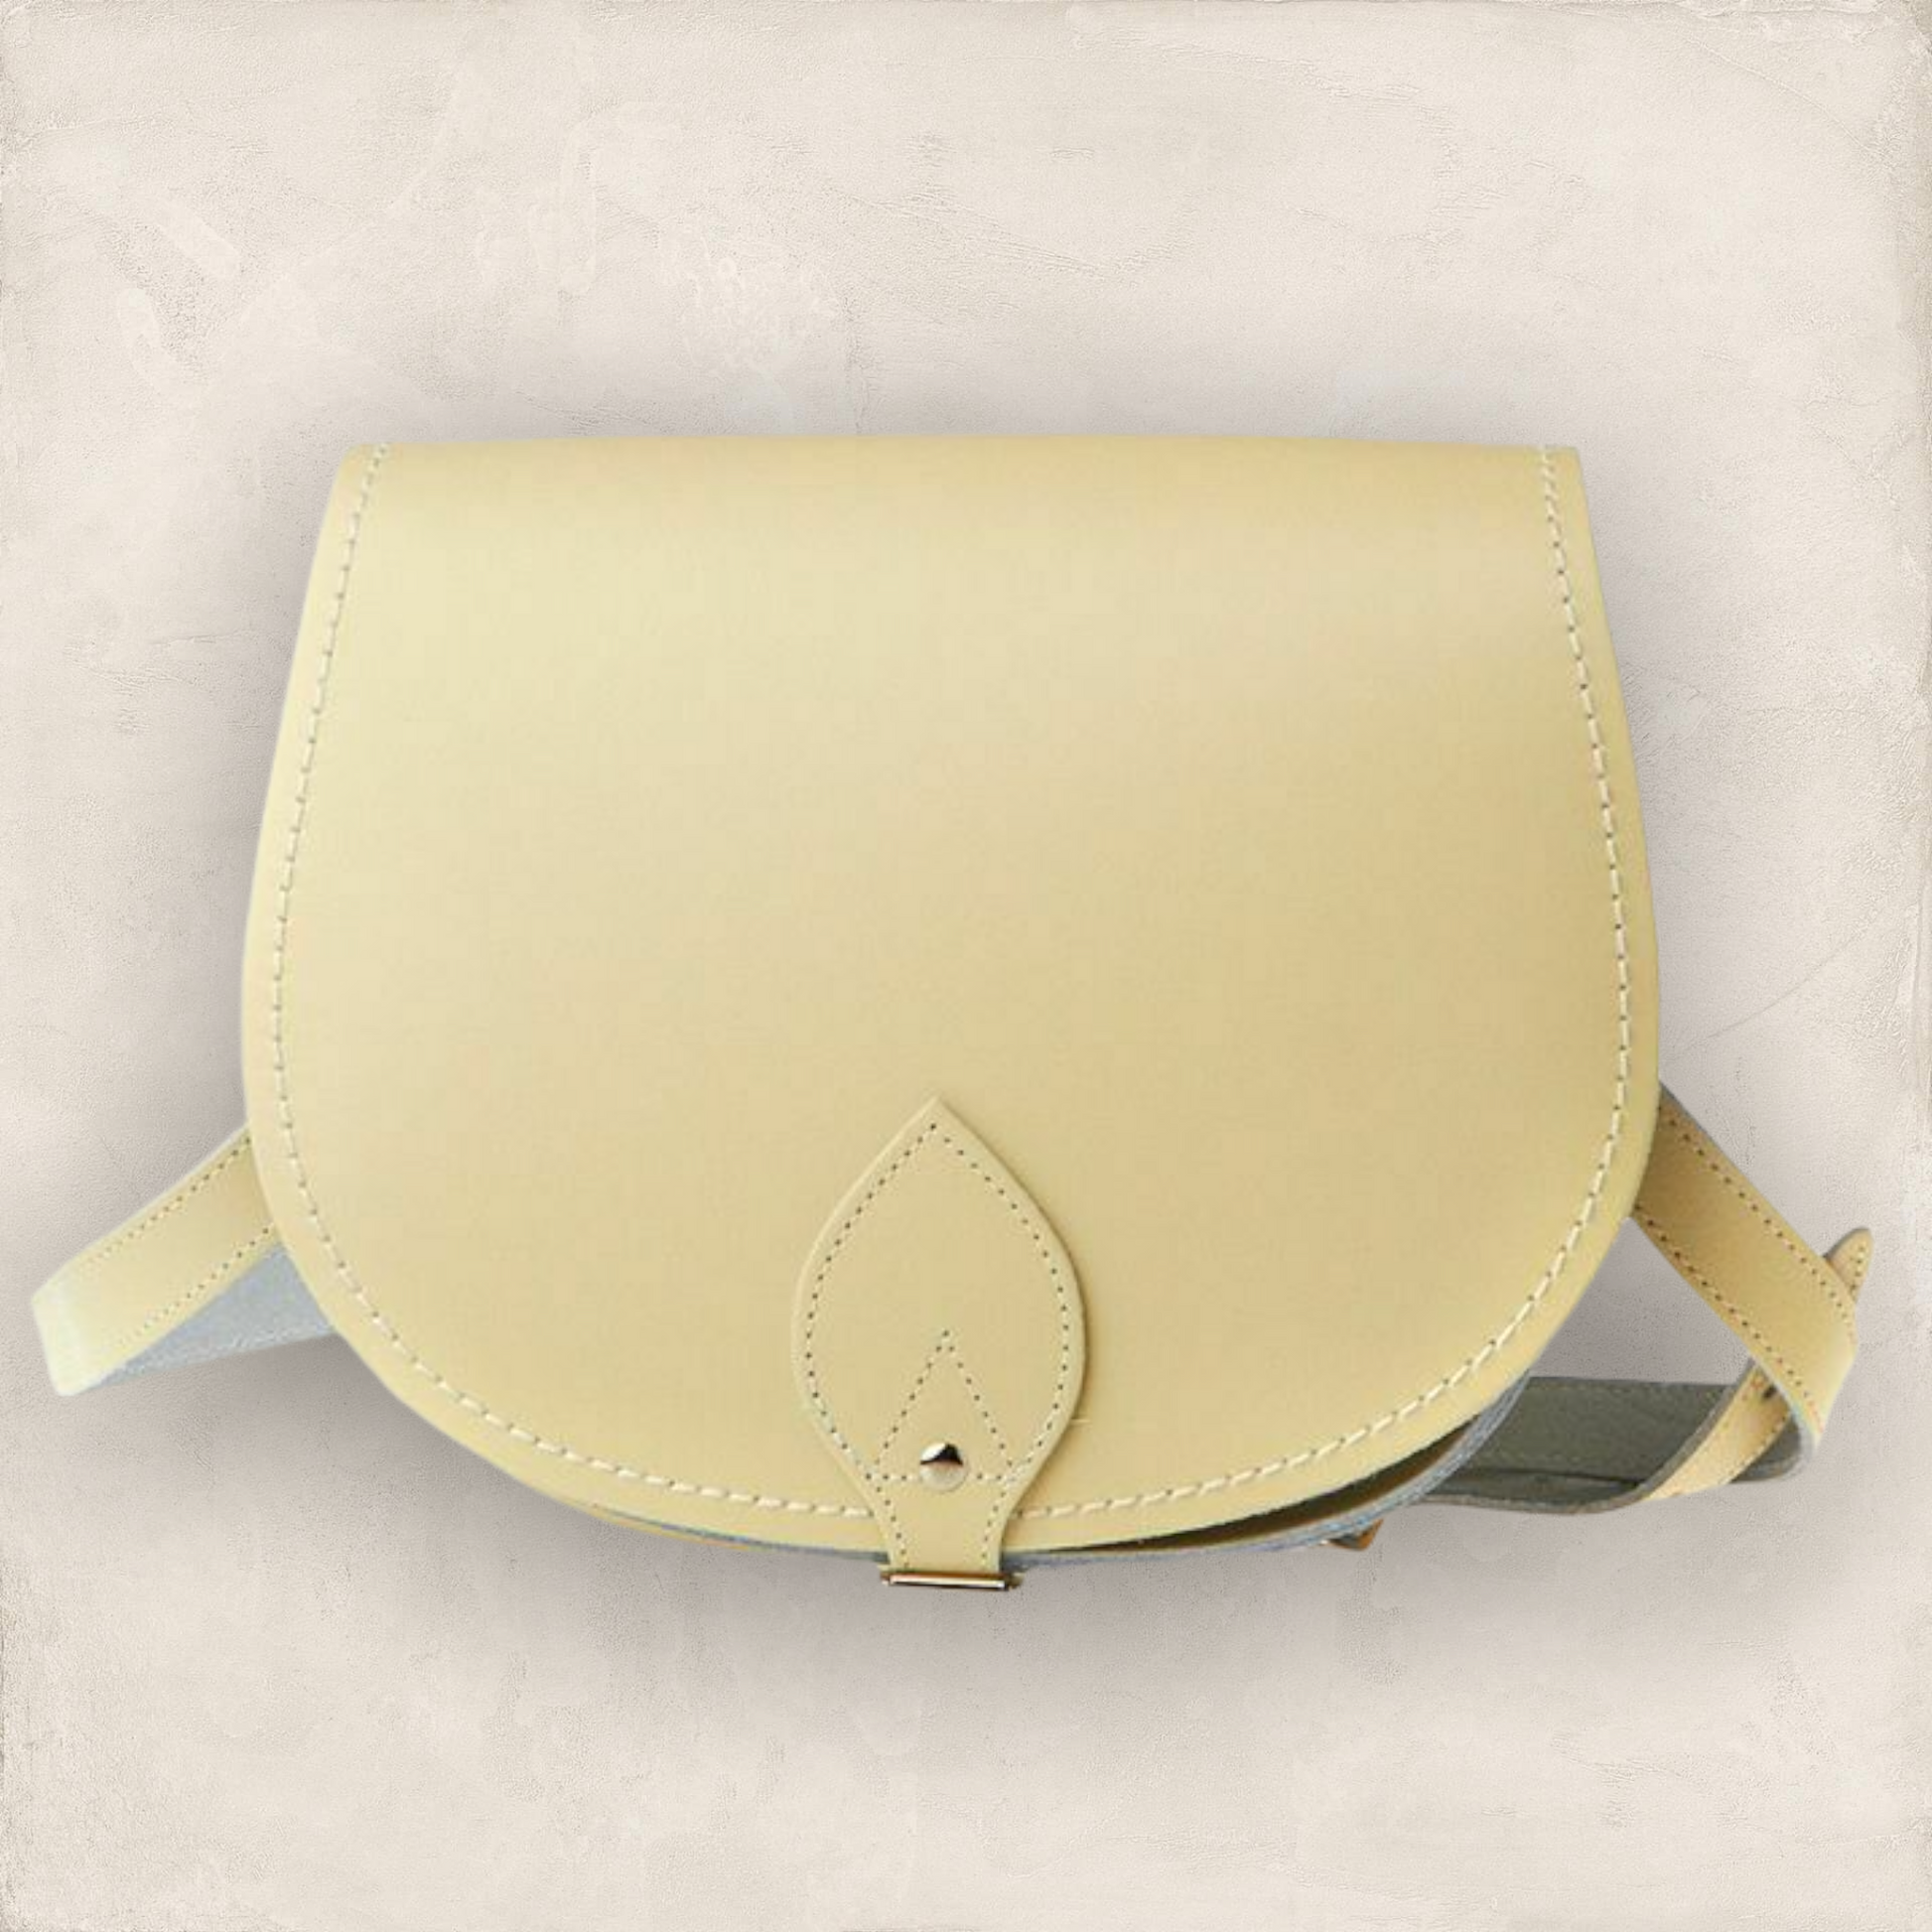 Zatchels Pastel Cream Yellow Leather Small Saddle Bag New with Certificate of Authenticity & Dustbag Timeless Fashions